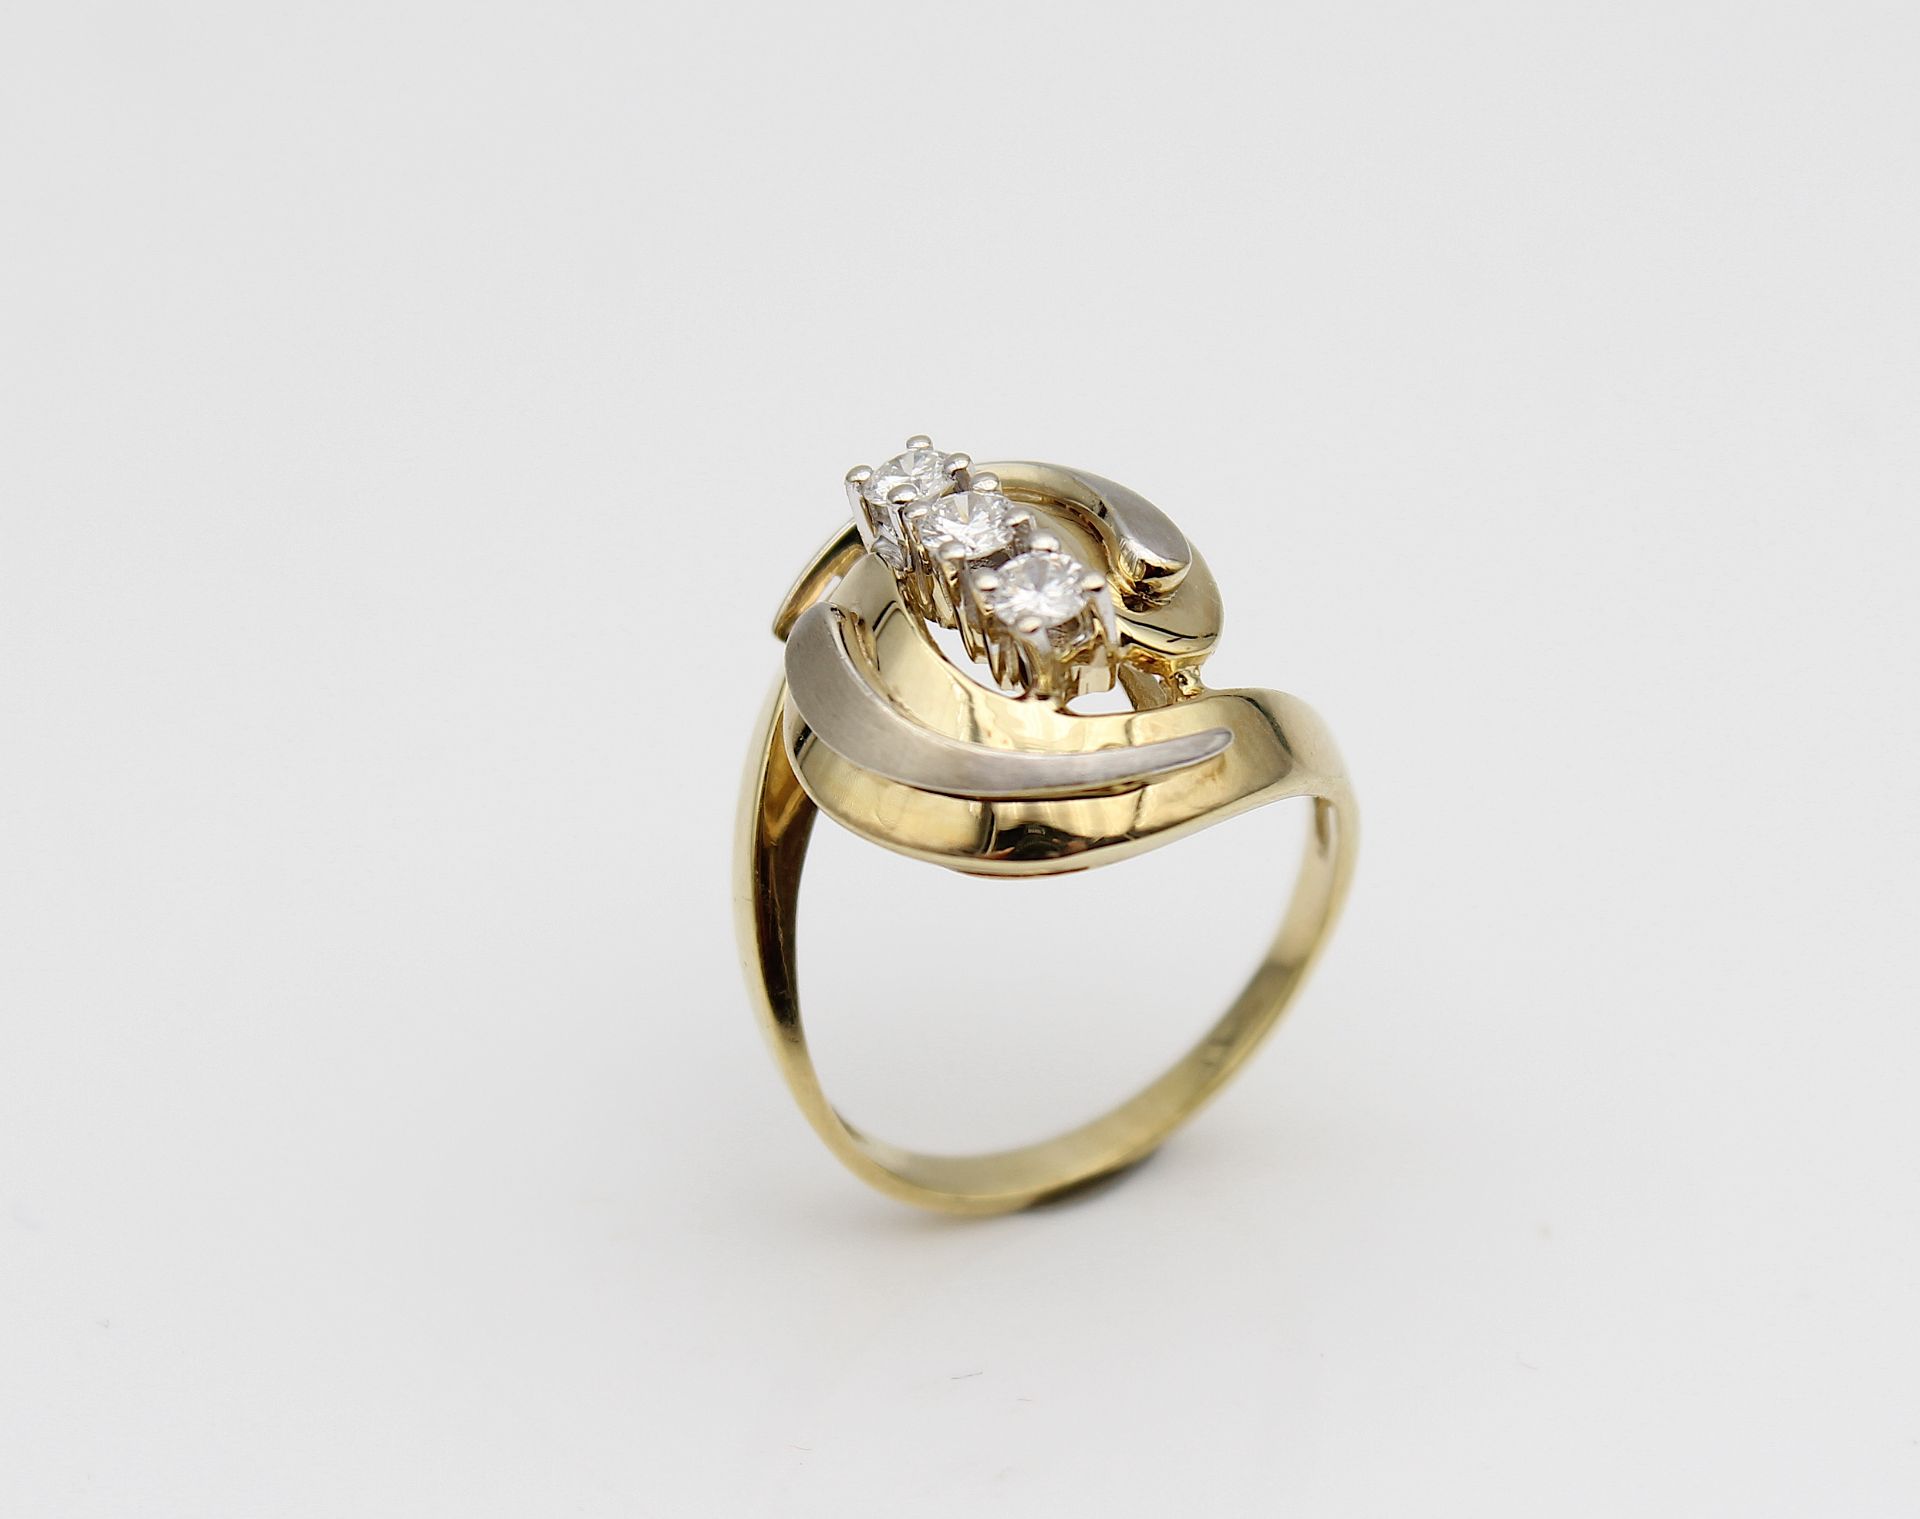 Decorative ring with brilliants - Image 2 of 4